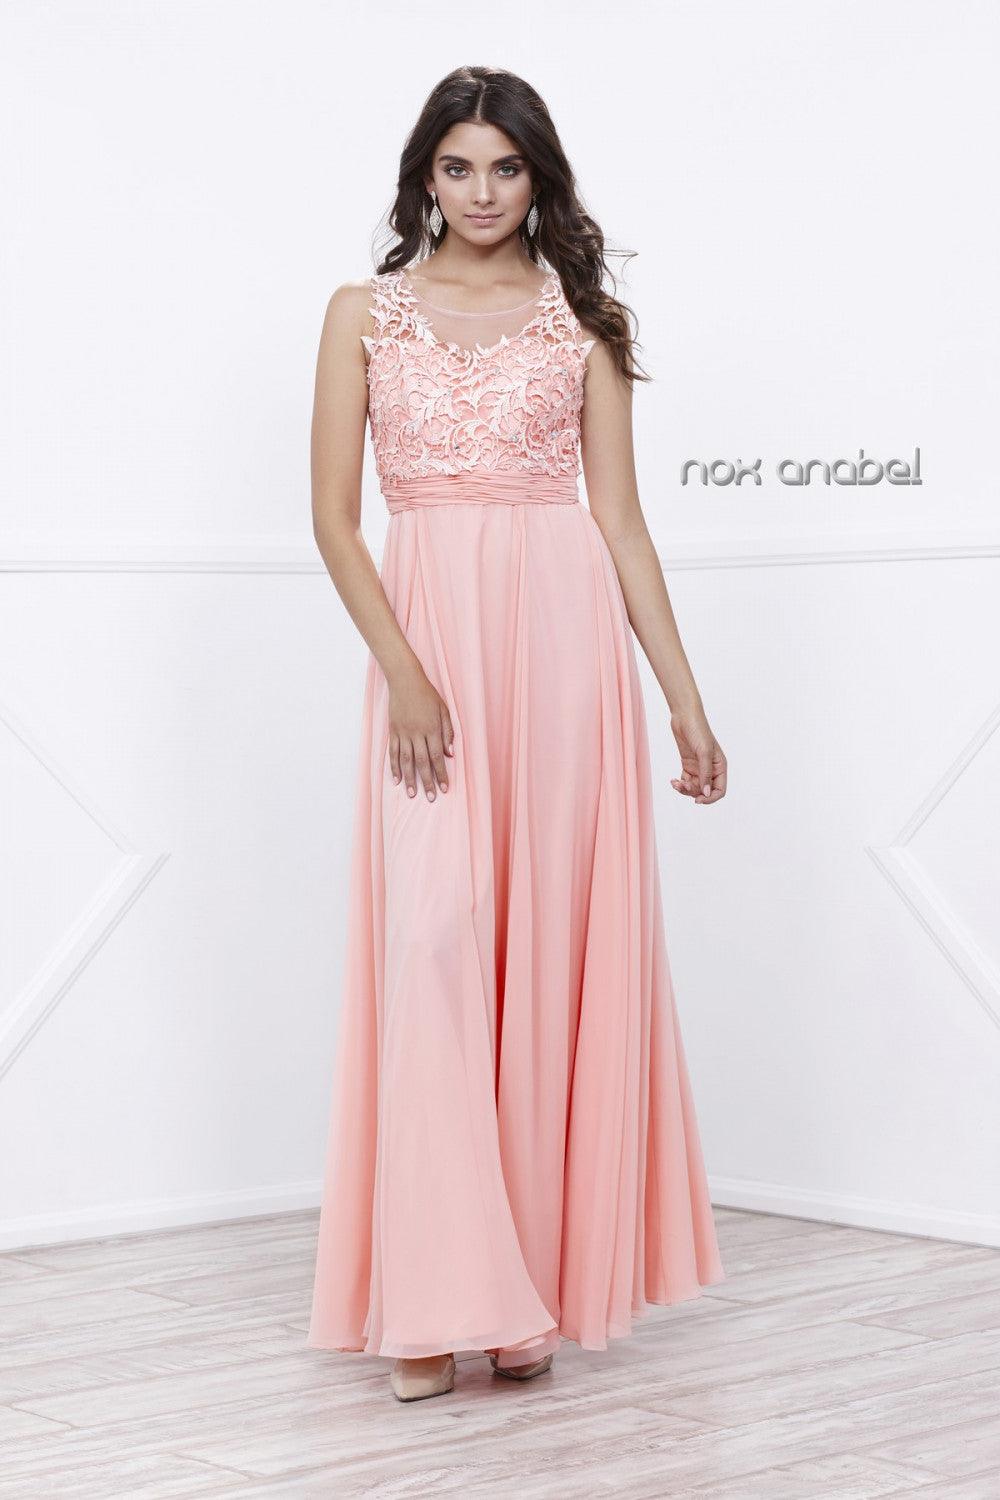 Long Lace Bodice Prom Illusion Dress - The Dress Outlet Nox Anabel